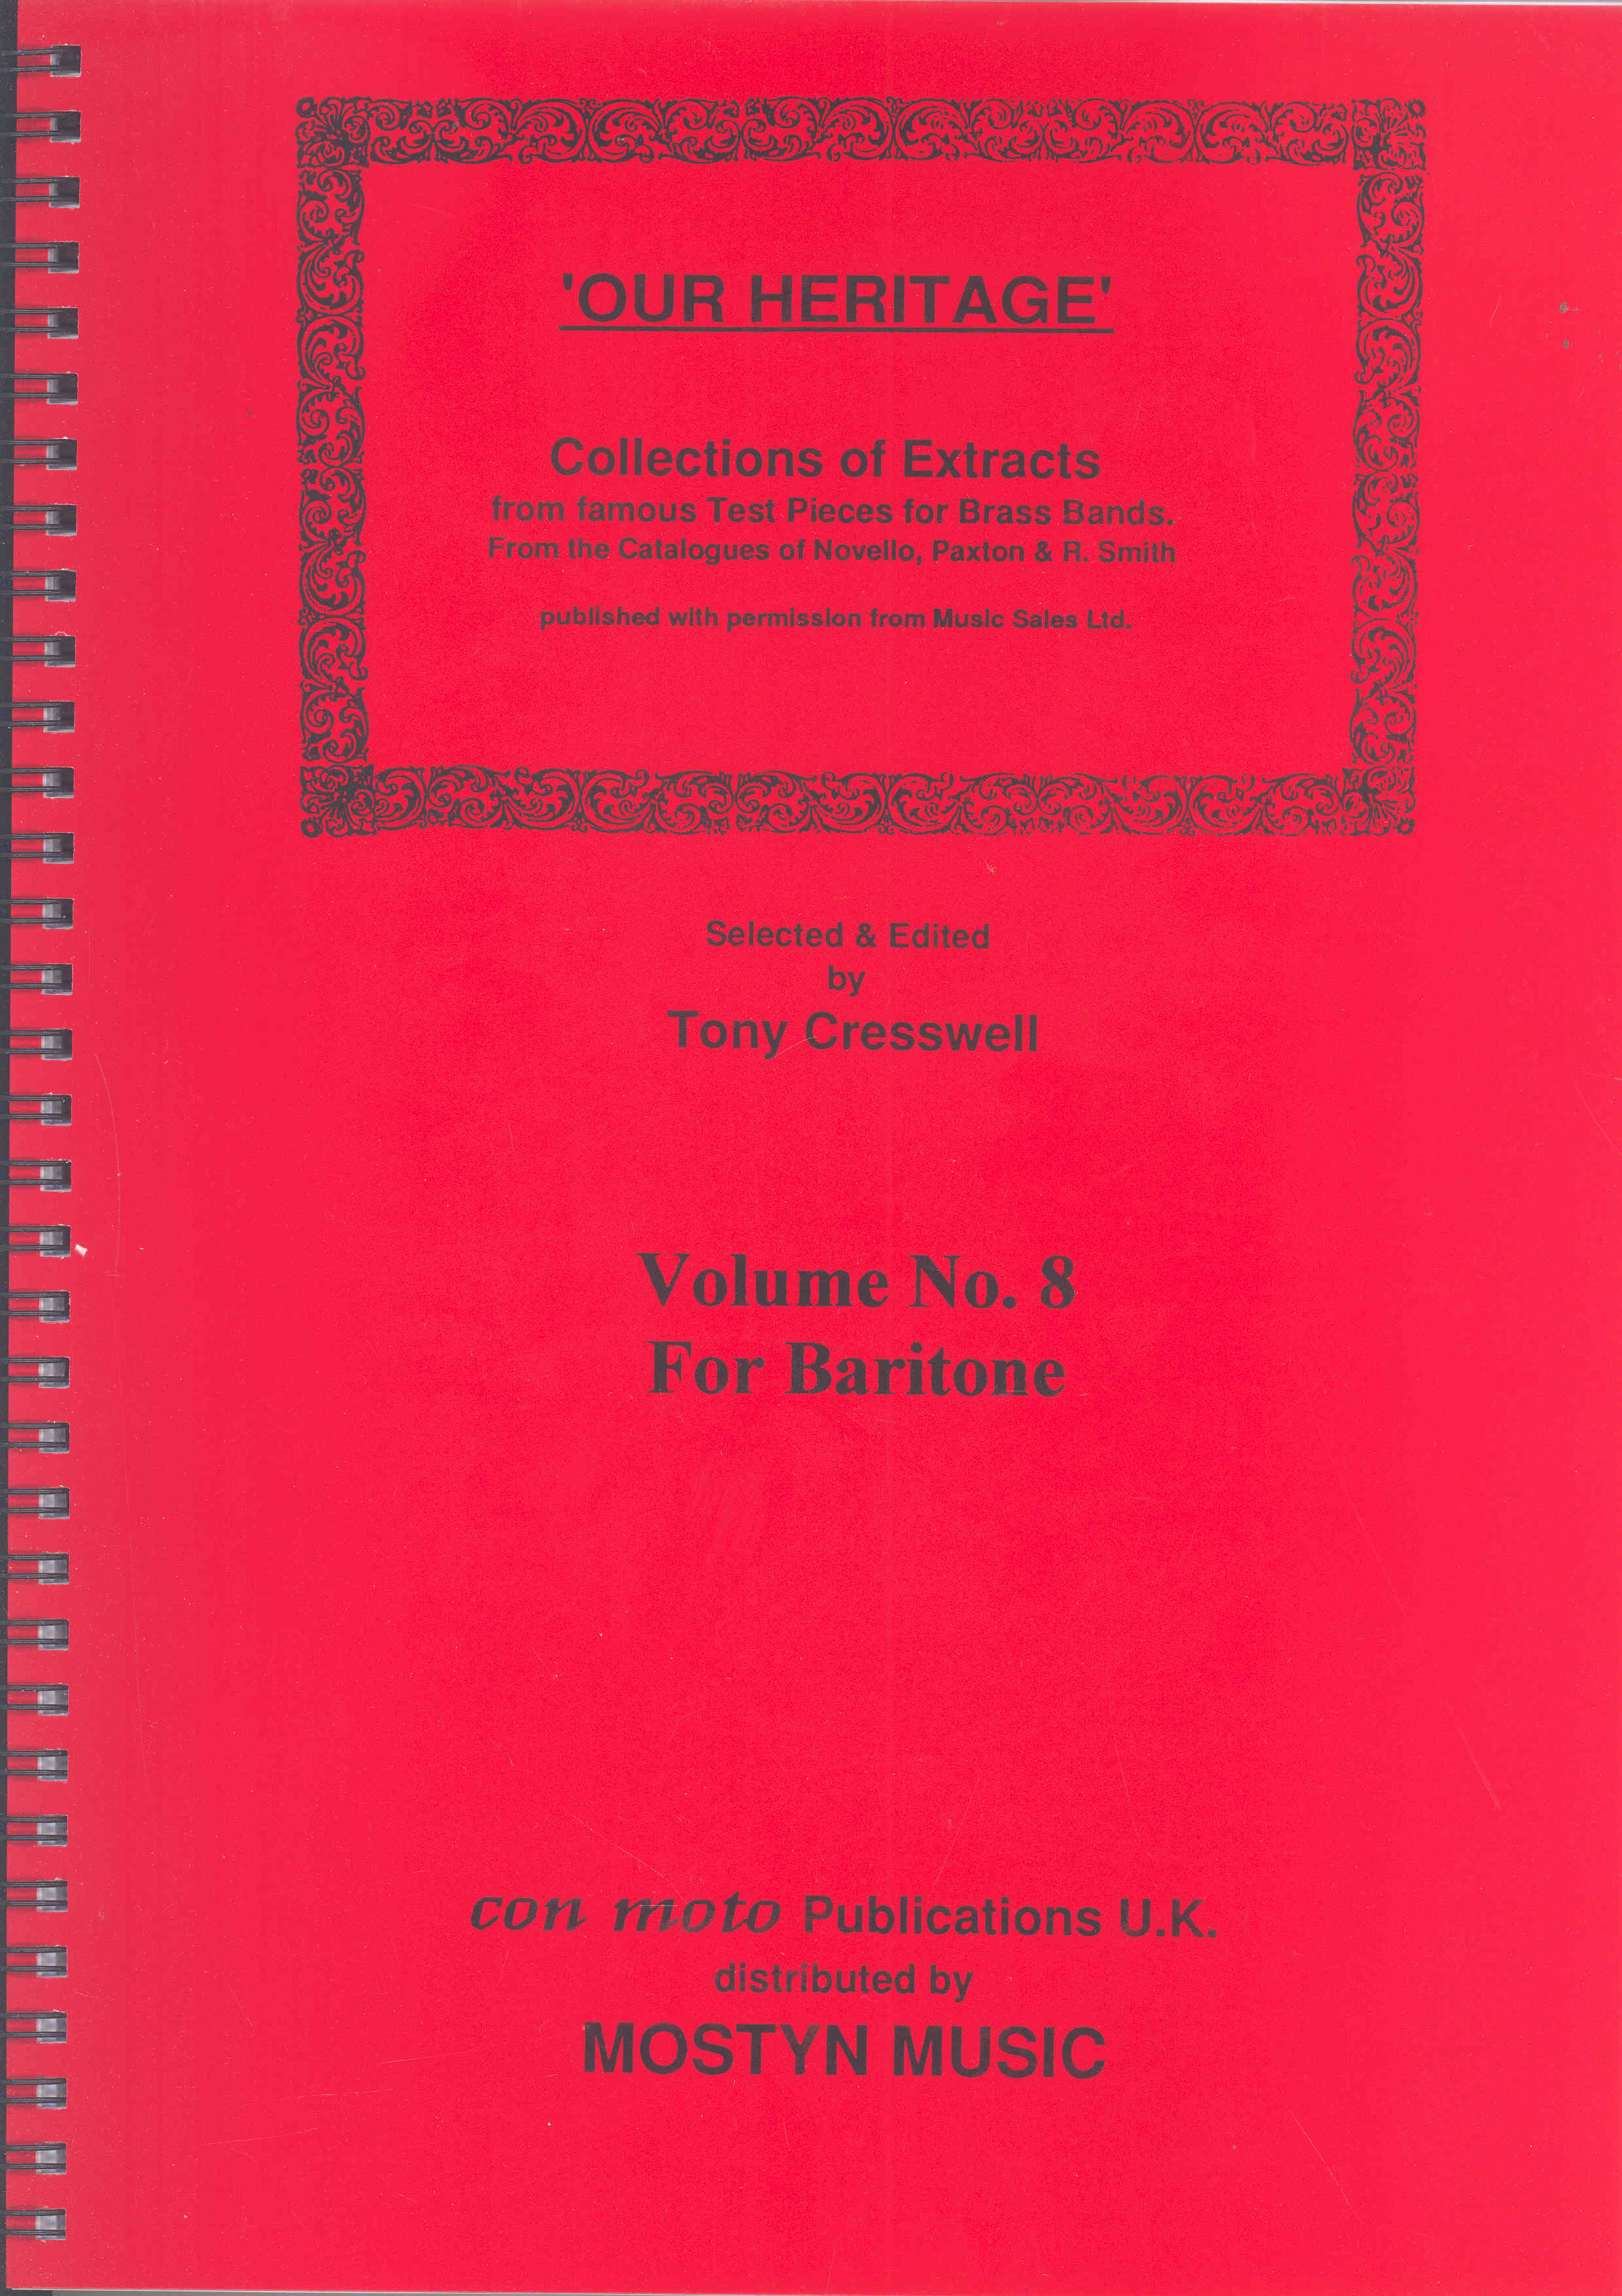 Our Heritage Vol 8 Bb Baritone Sheet Music Songbook